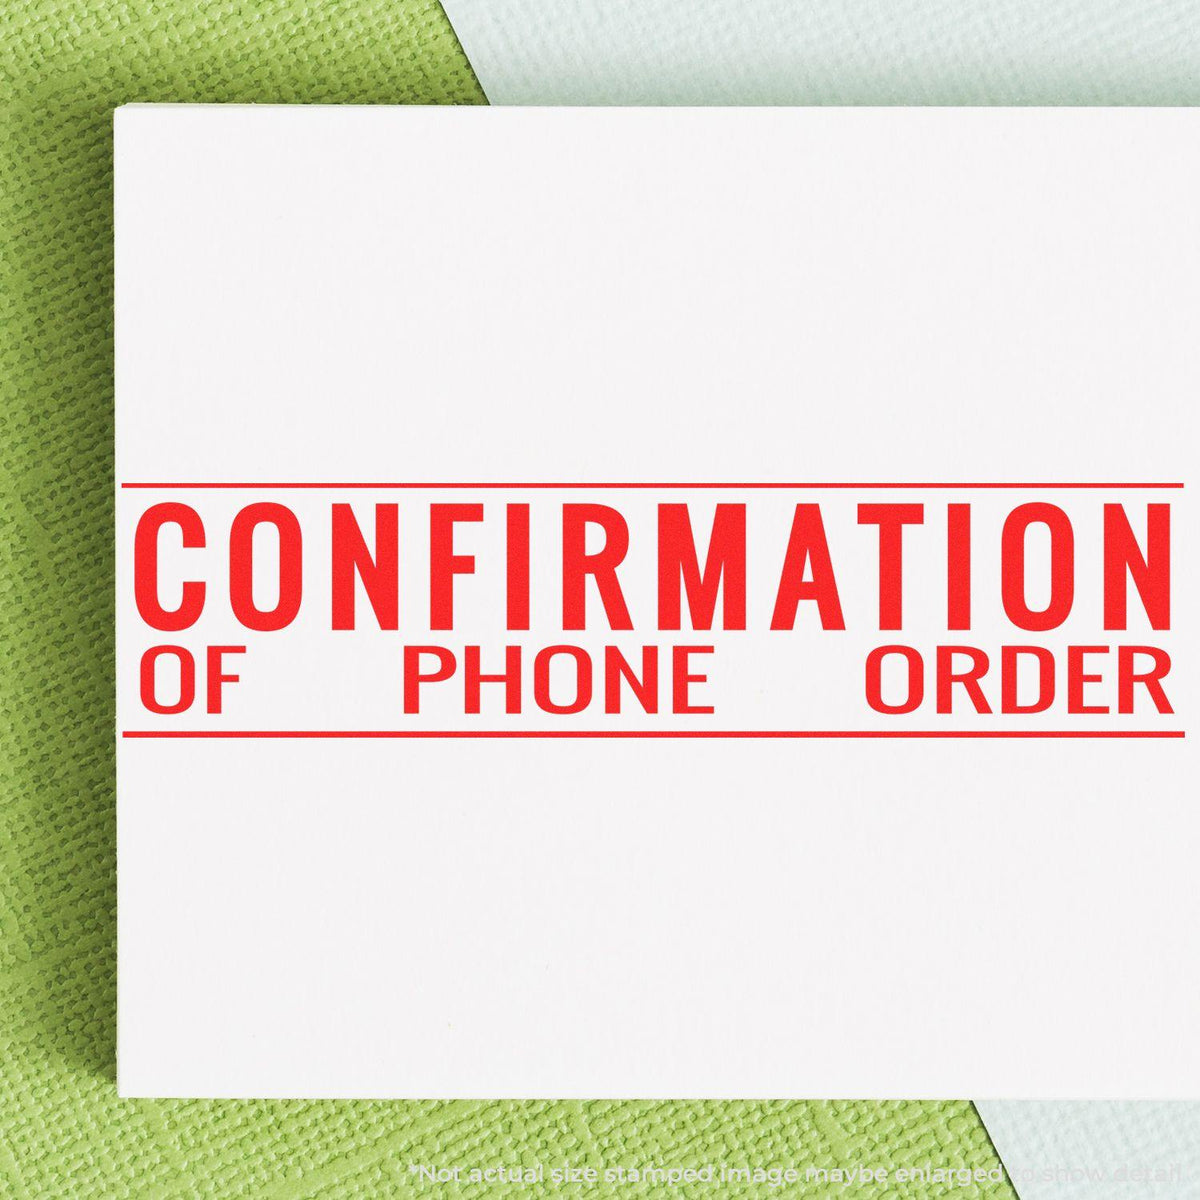 In Use Large Pre-Inked Confirmation of Phone Order Stamp Image